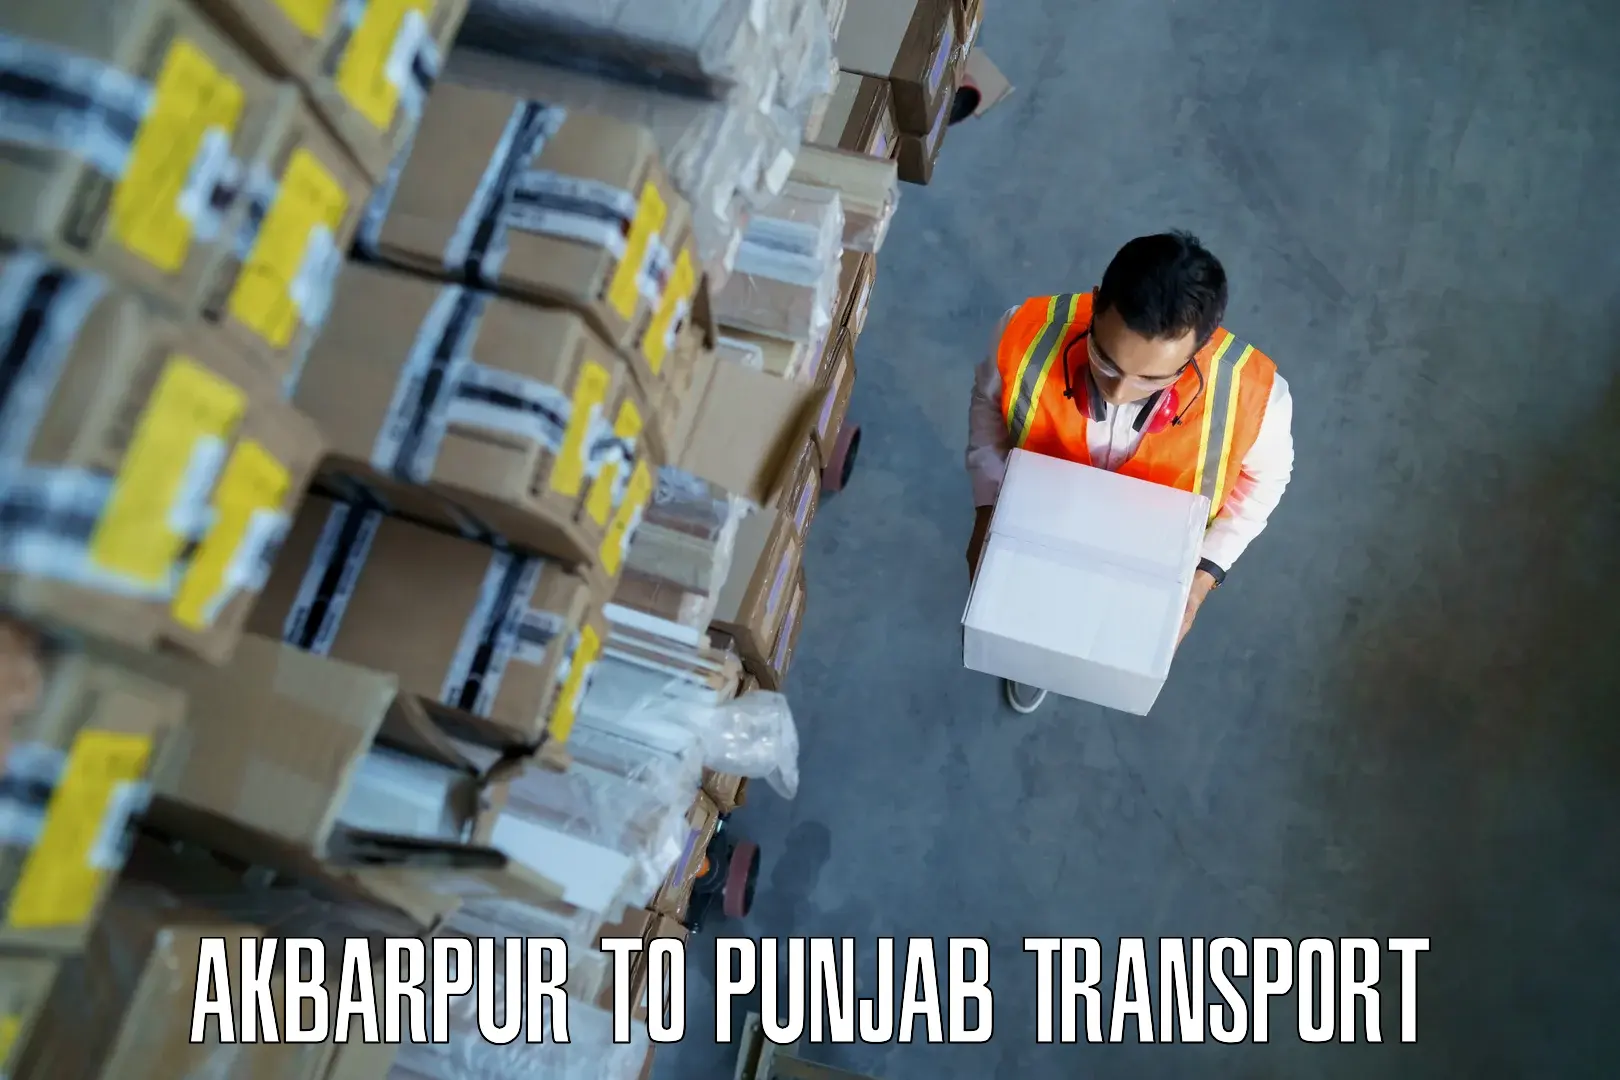 Transport bike from one state to another Akbarpur to Punjab